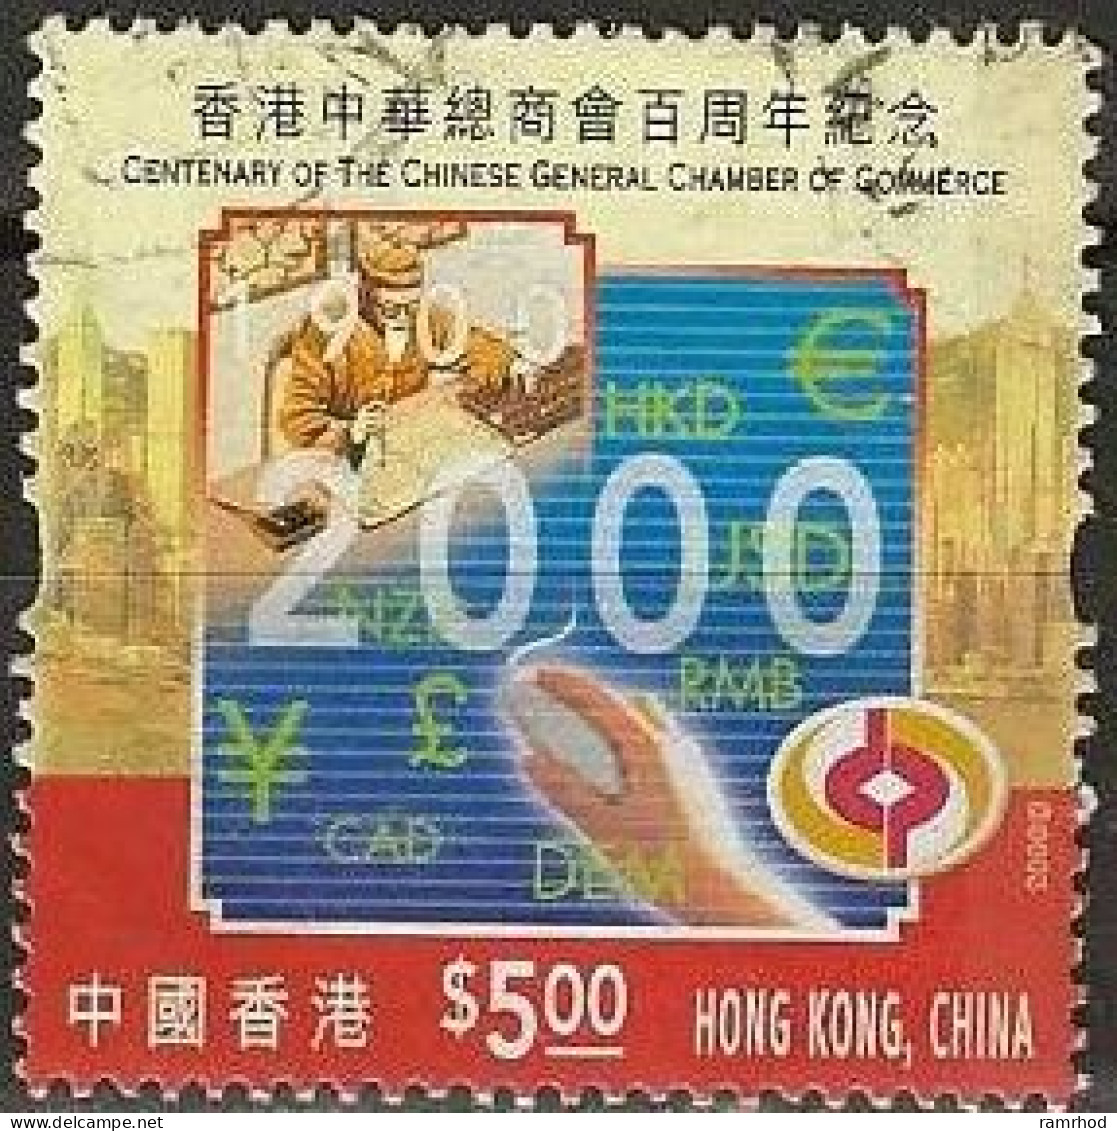 HONG KONG 2000 Centenary Of General Chamber Of Commerce - $5 - Man Using Abacus And Hand Using Mouse FU - Gebruikt